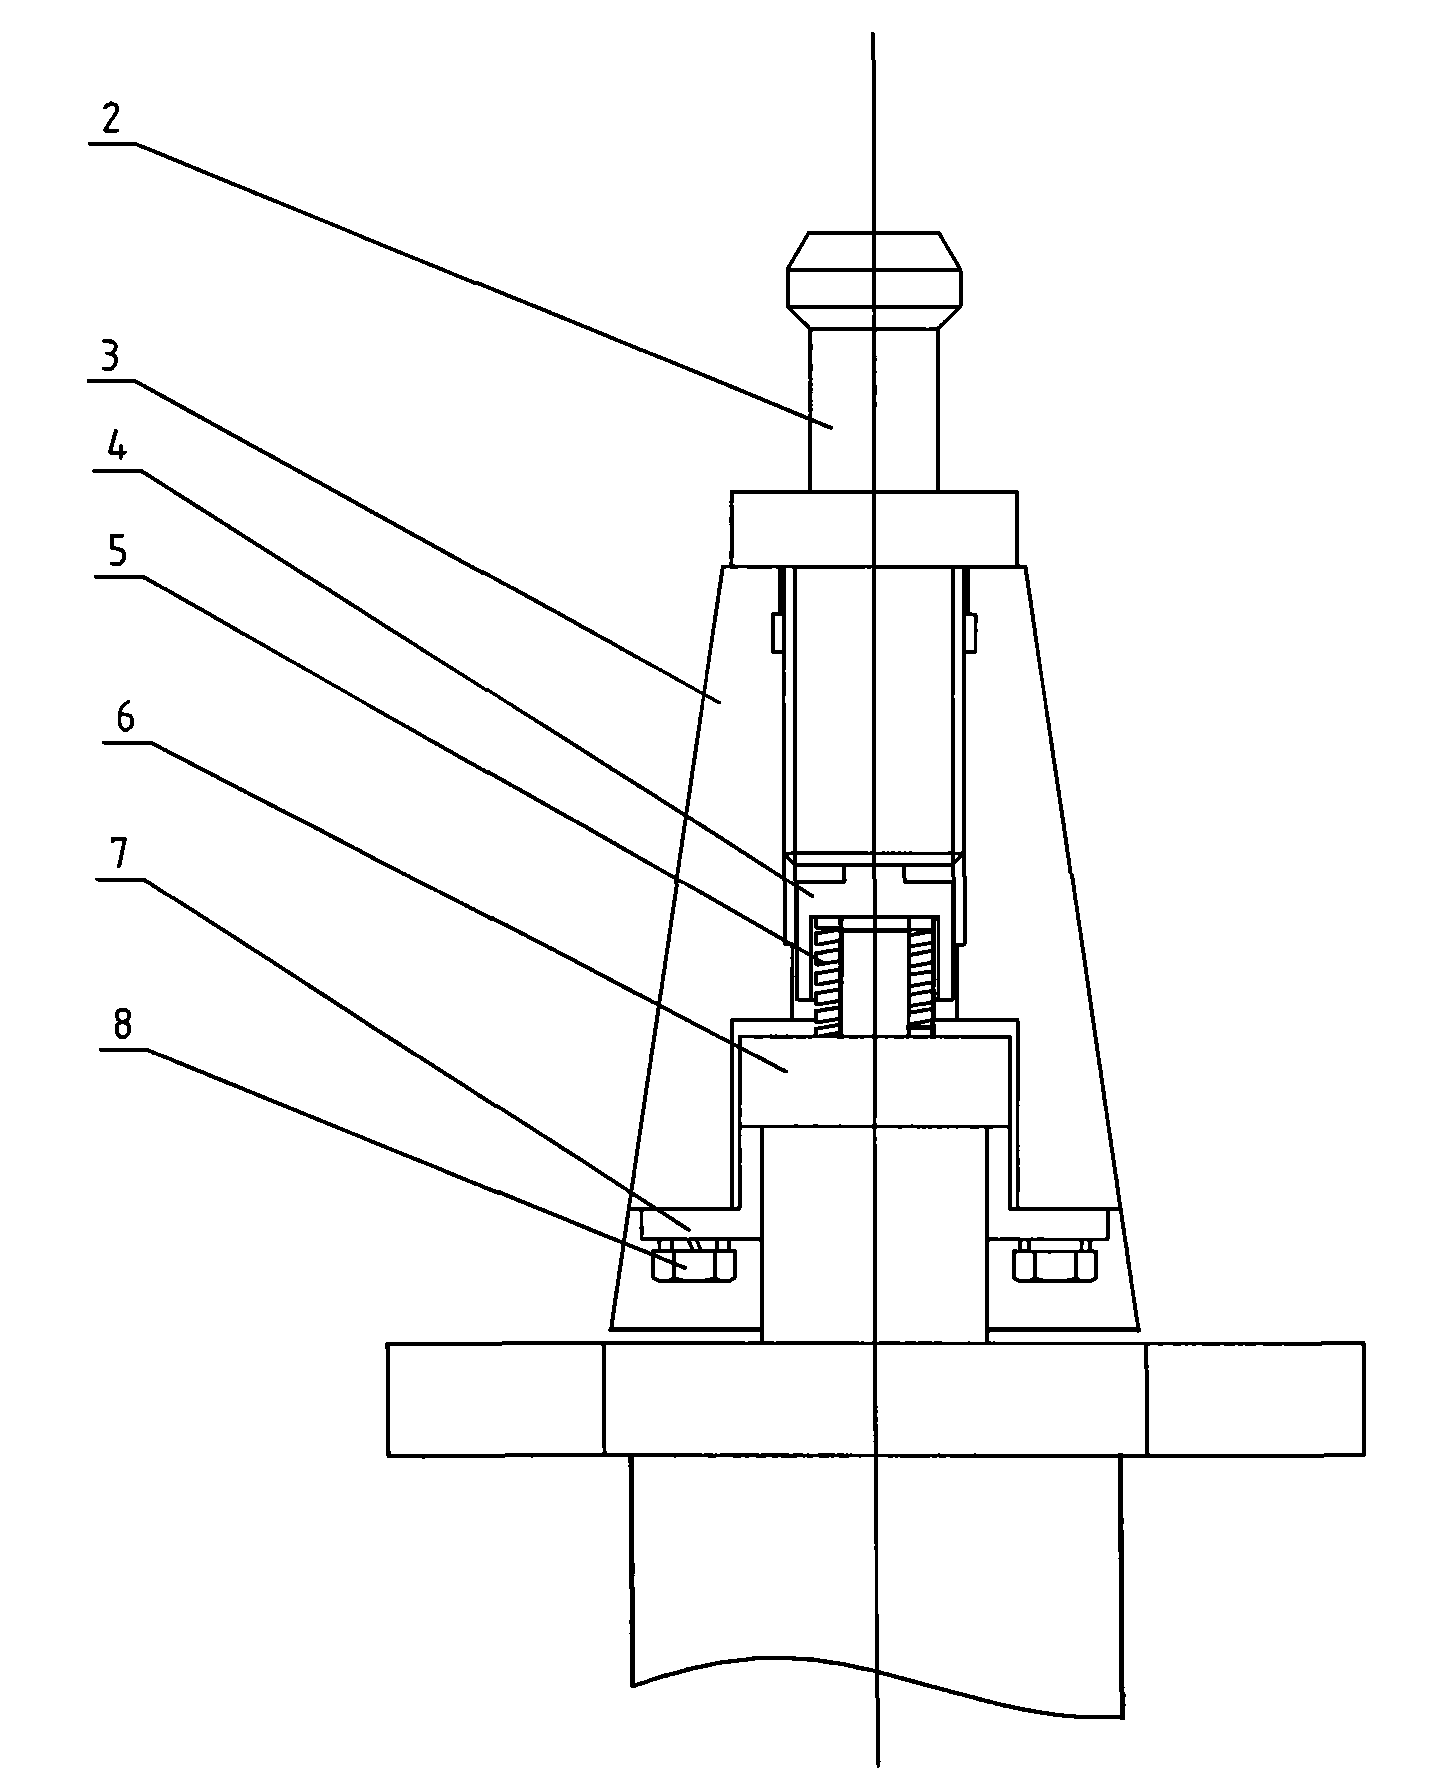 Installing structure of taper shank with attached cutting head